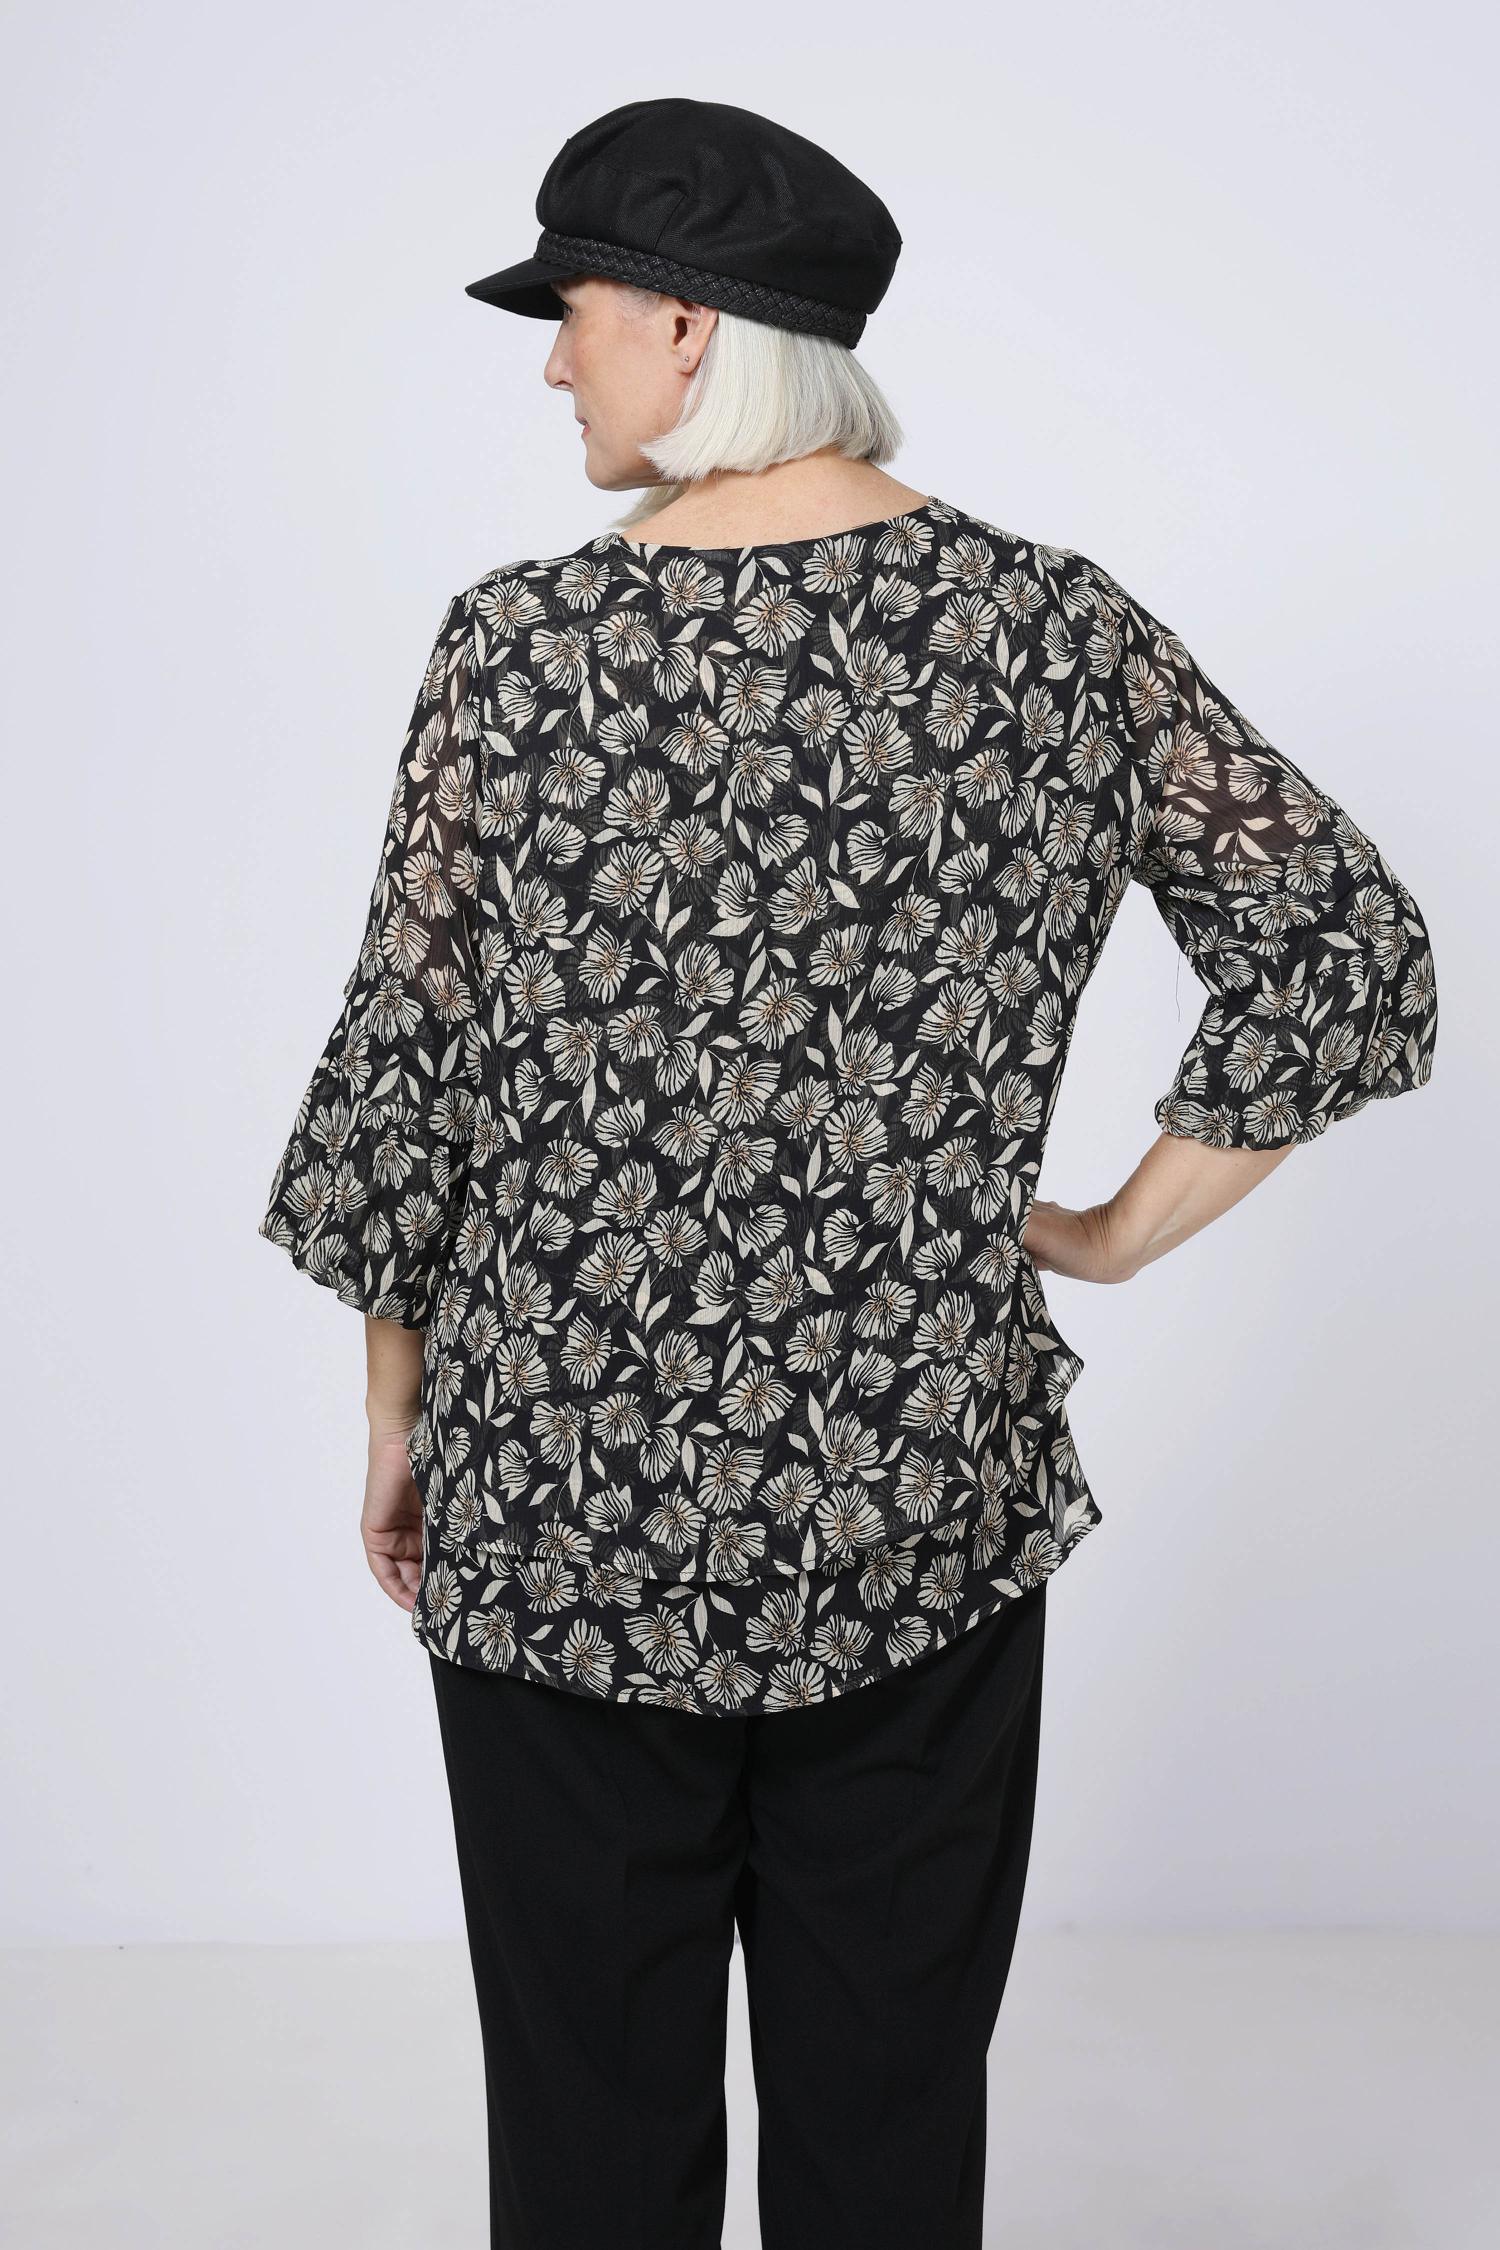 Overlay blouse in printed voile.